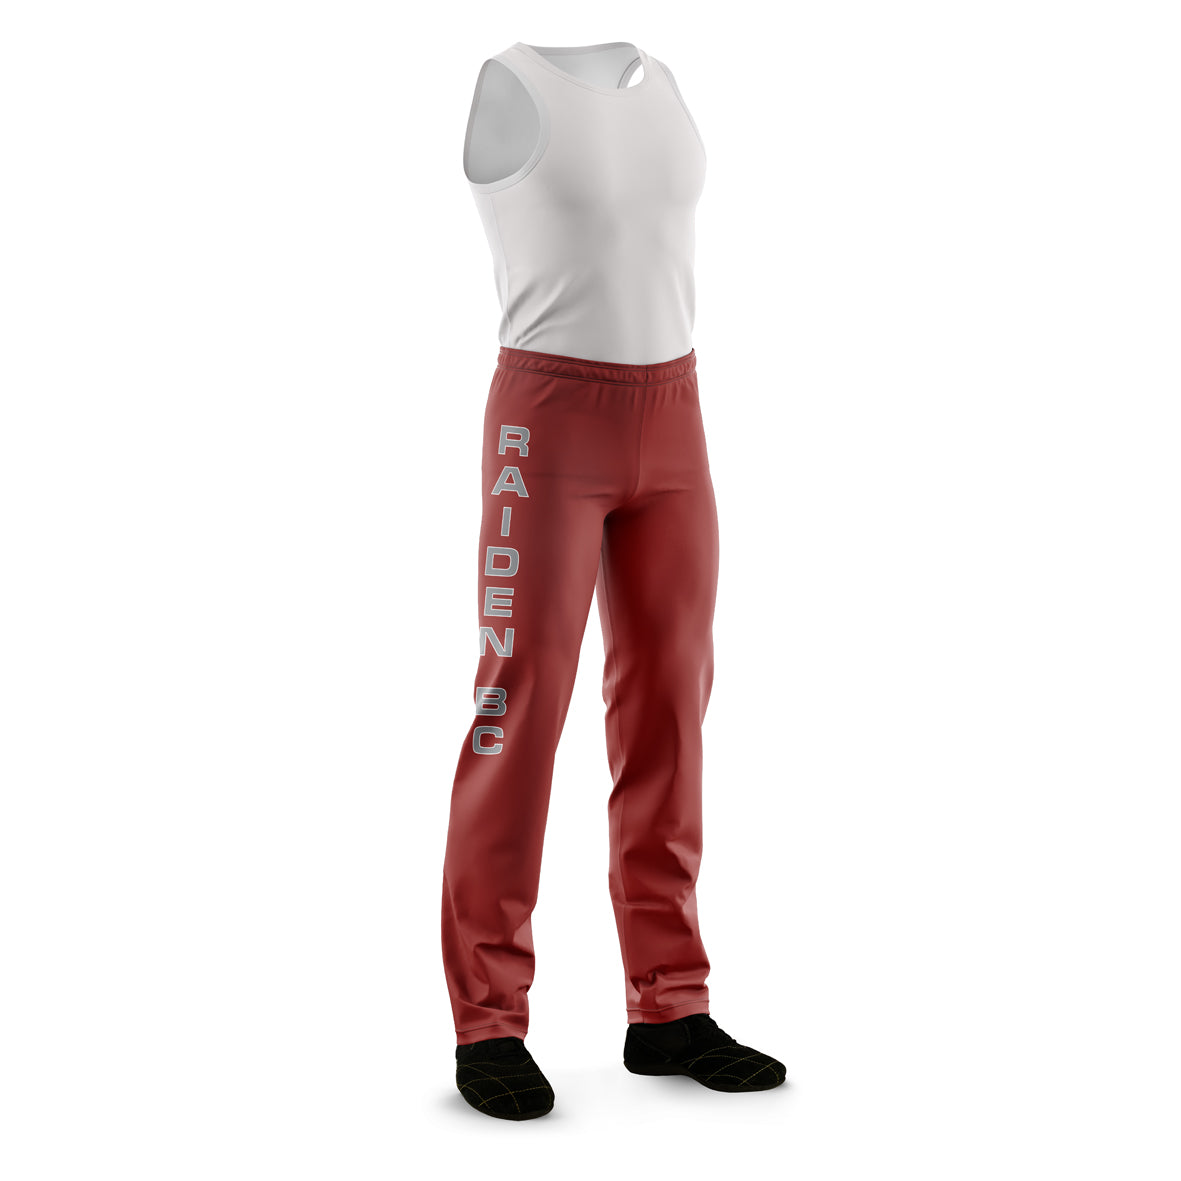 PERSO CLUB TROUSERS